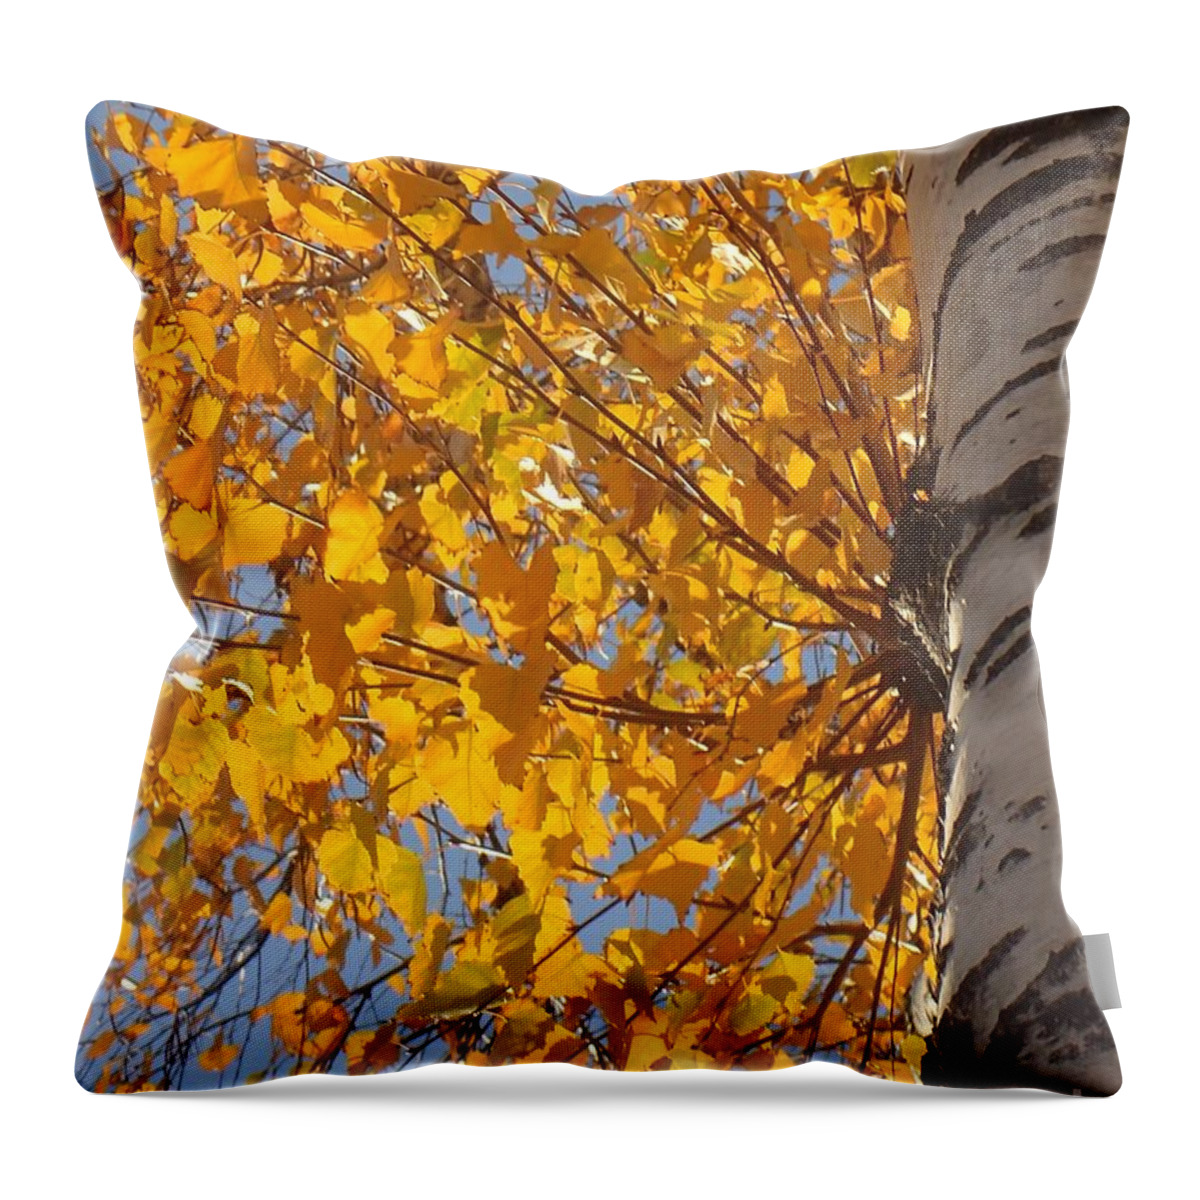 Abstract Throw Pillow featuring the photograph Feathery Fan Of Leaves by Christina Verdgeline